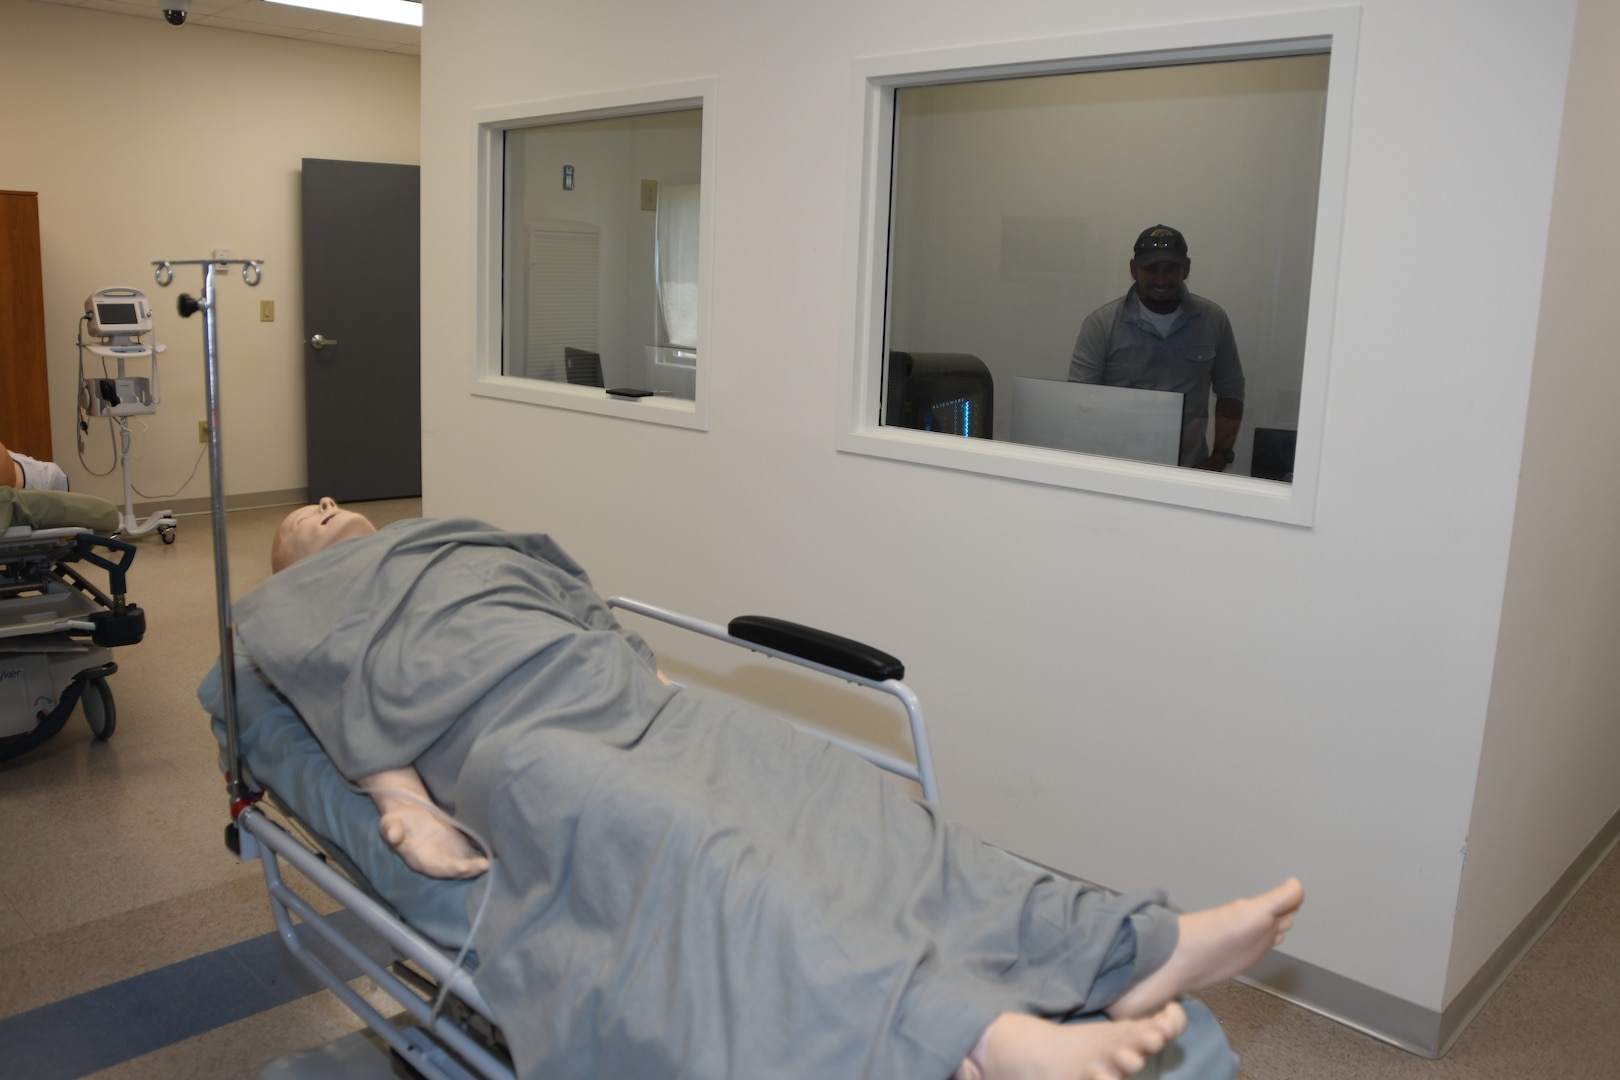 Medical professionals aboard Marine Corps Base Camp Lejeune will soon welcome a new simulation education center to support operational and clinical education. The new “Healthcare Simulation and Bioskills Center” will open its doors on July 11, 2023.